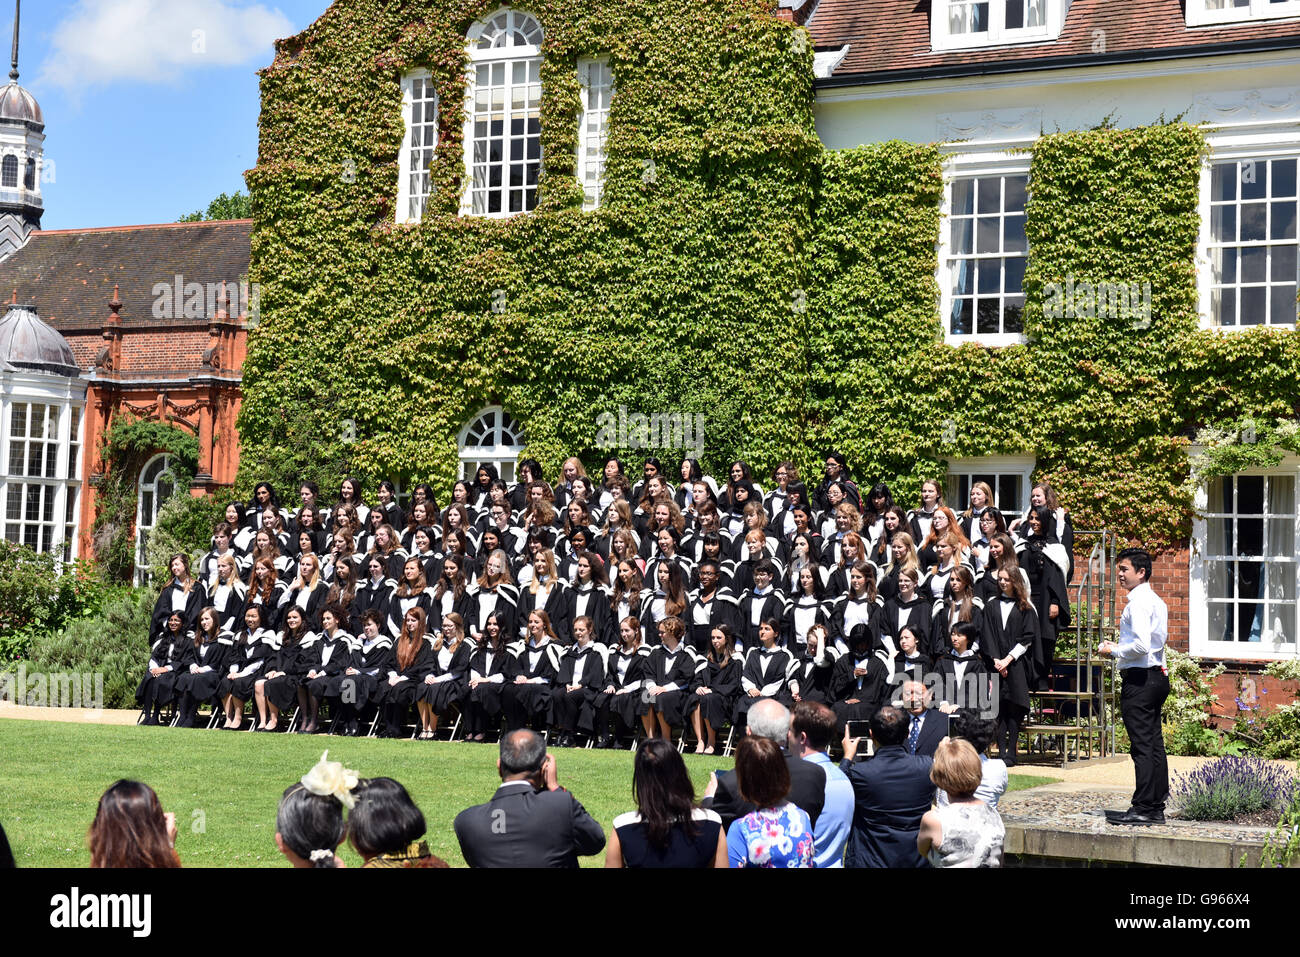 Students are assembled at Newnham college Cambridge for their graduation photo wearing fur lined hoods and gowns Stock Photo